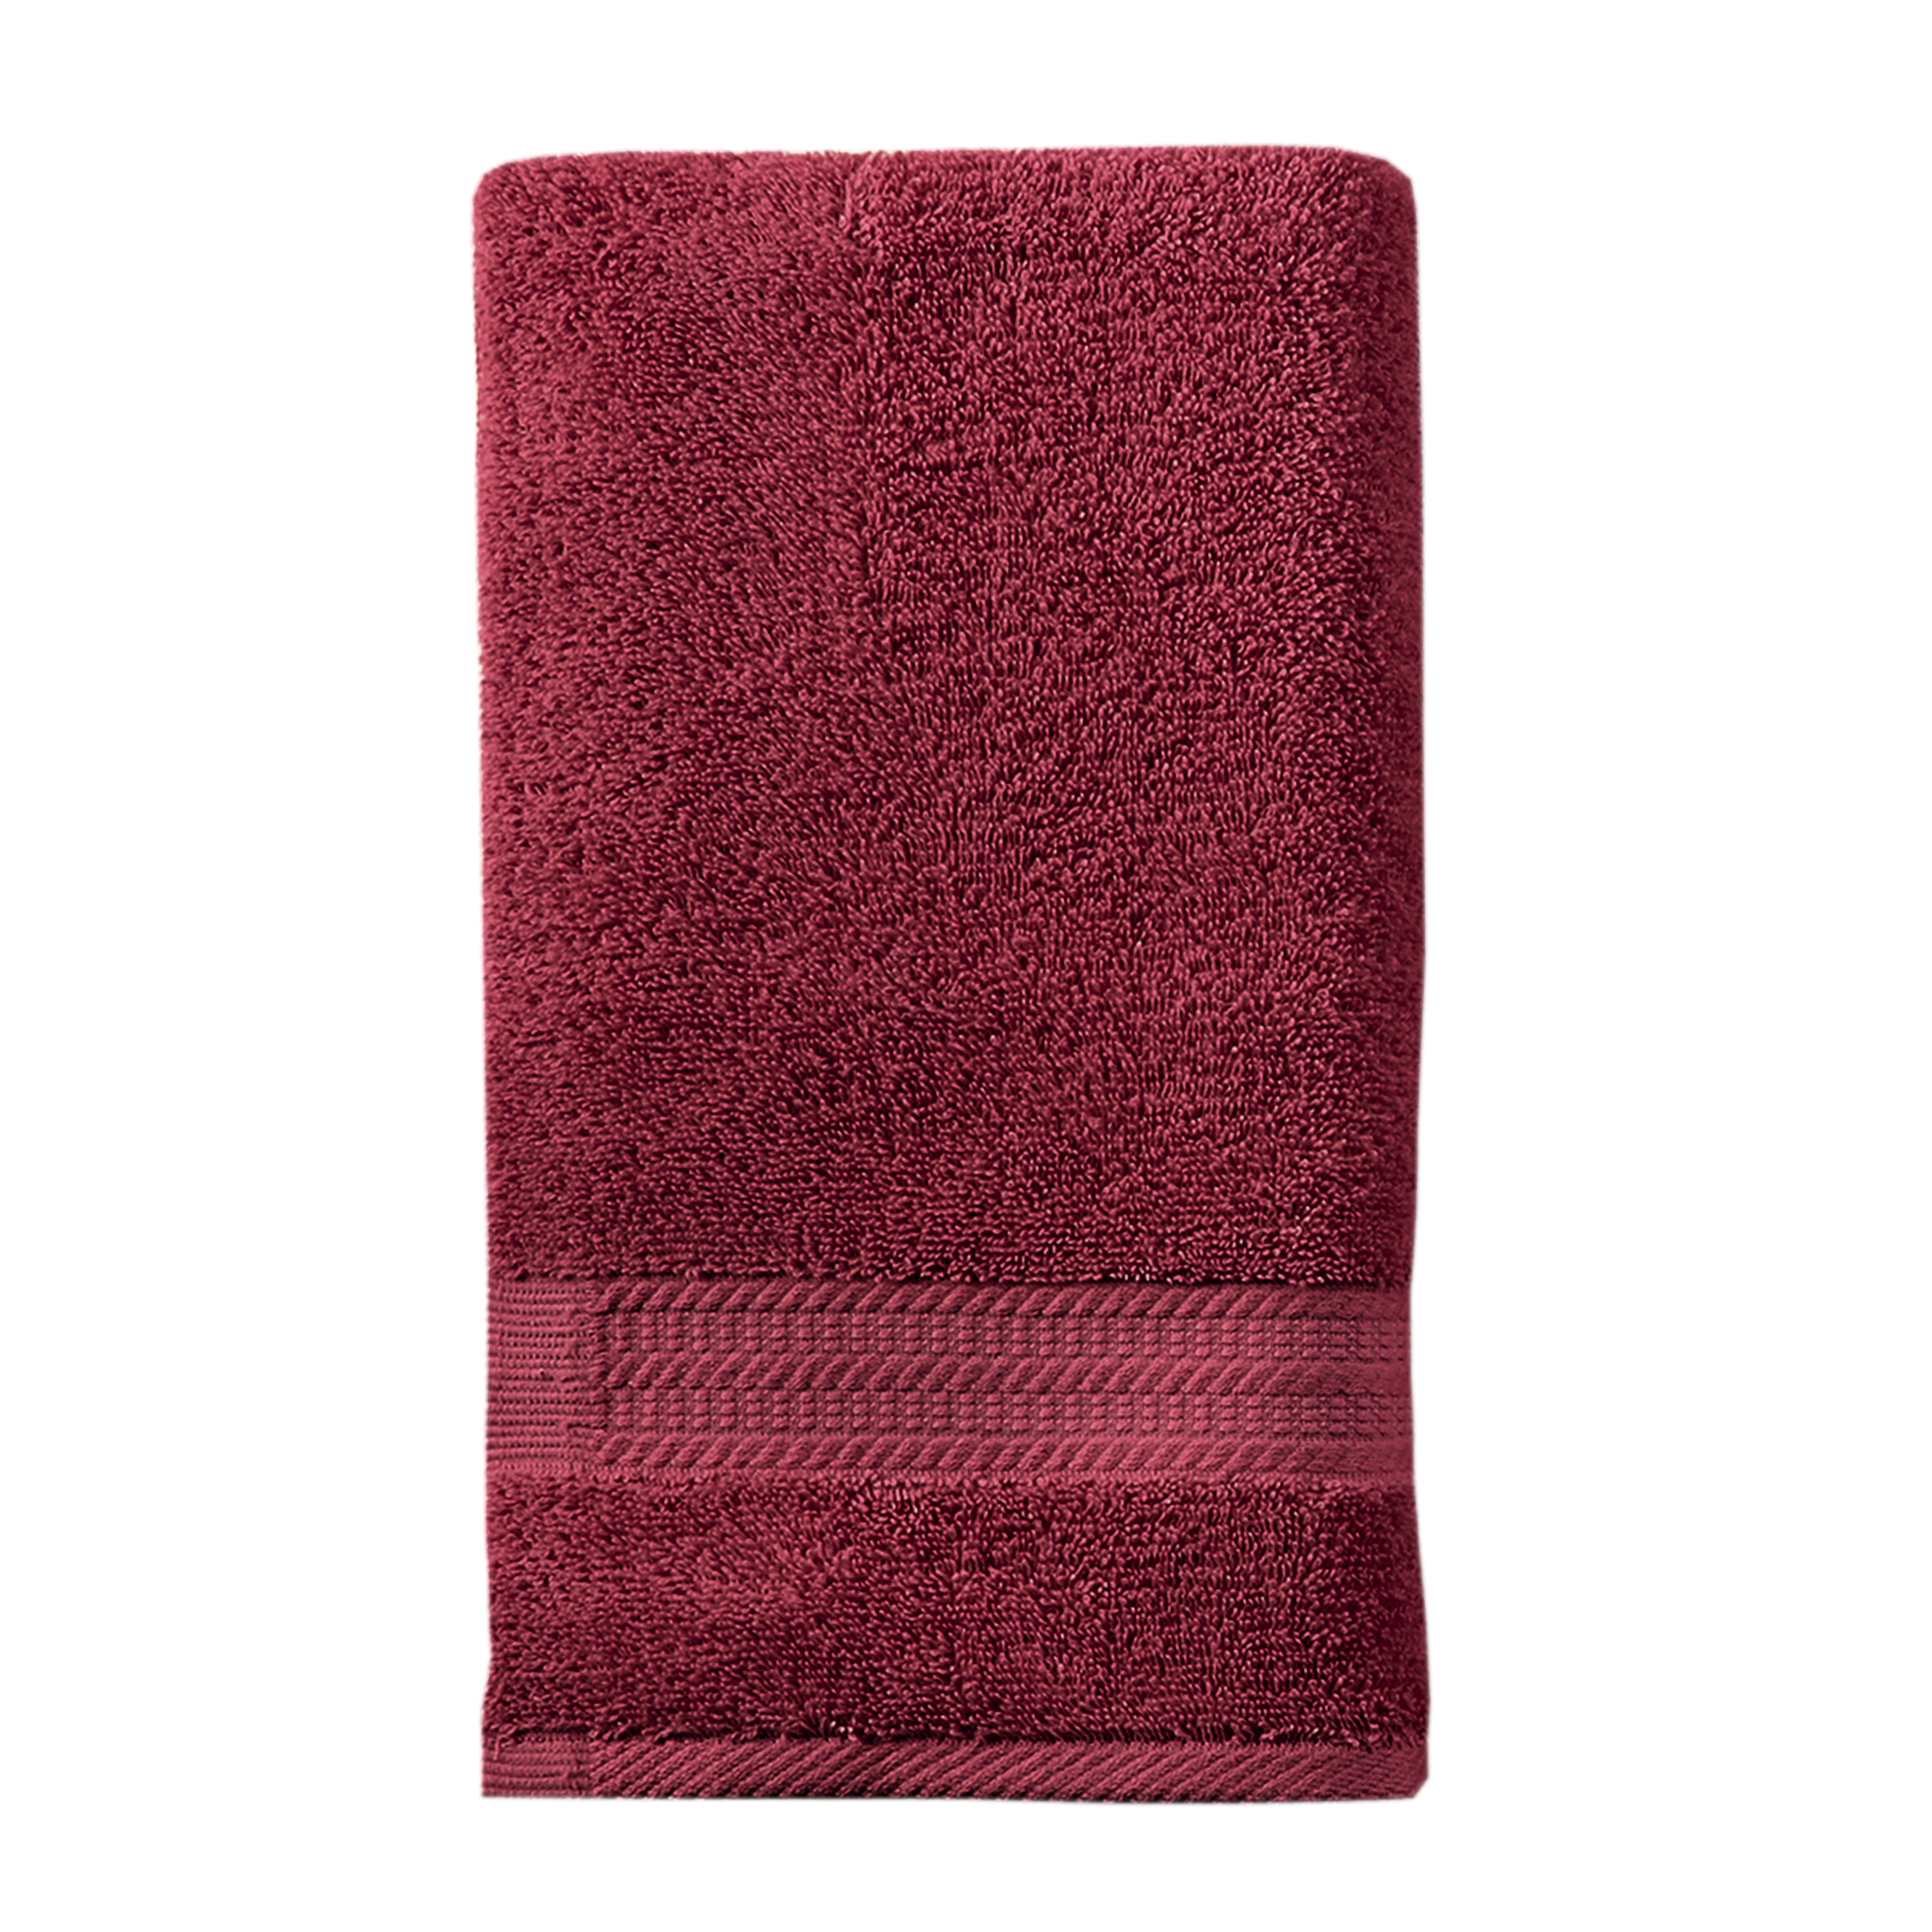 Better Homes & Gardens Adult Hand Towel, Solid Red - image 2 of 7